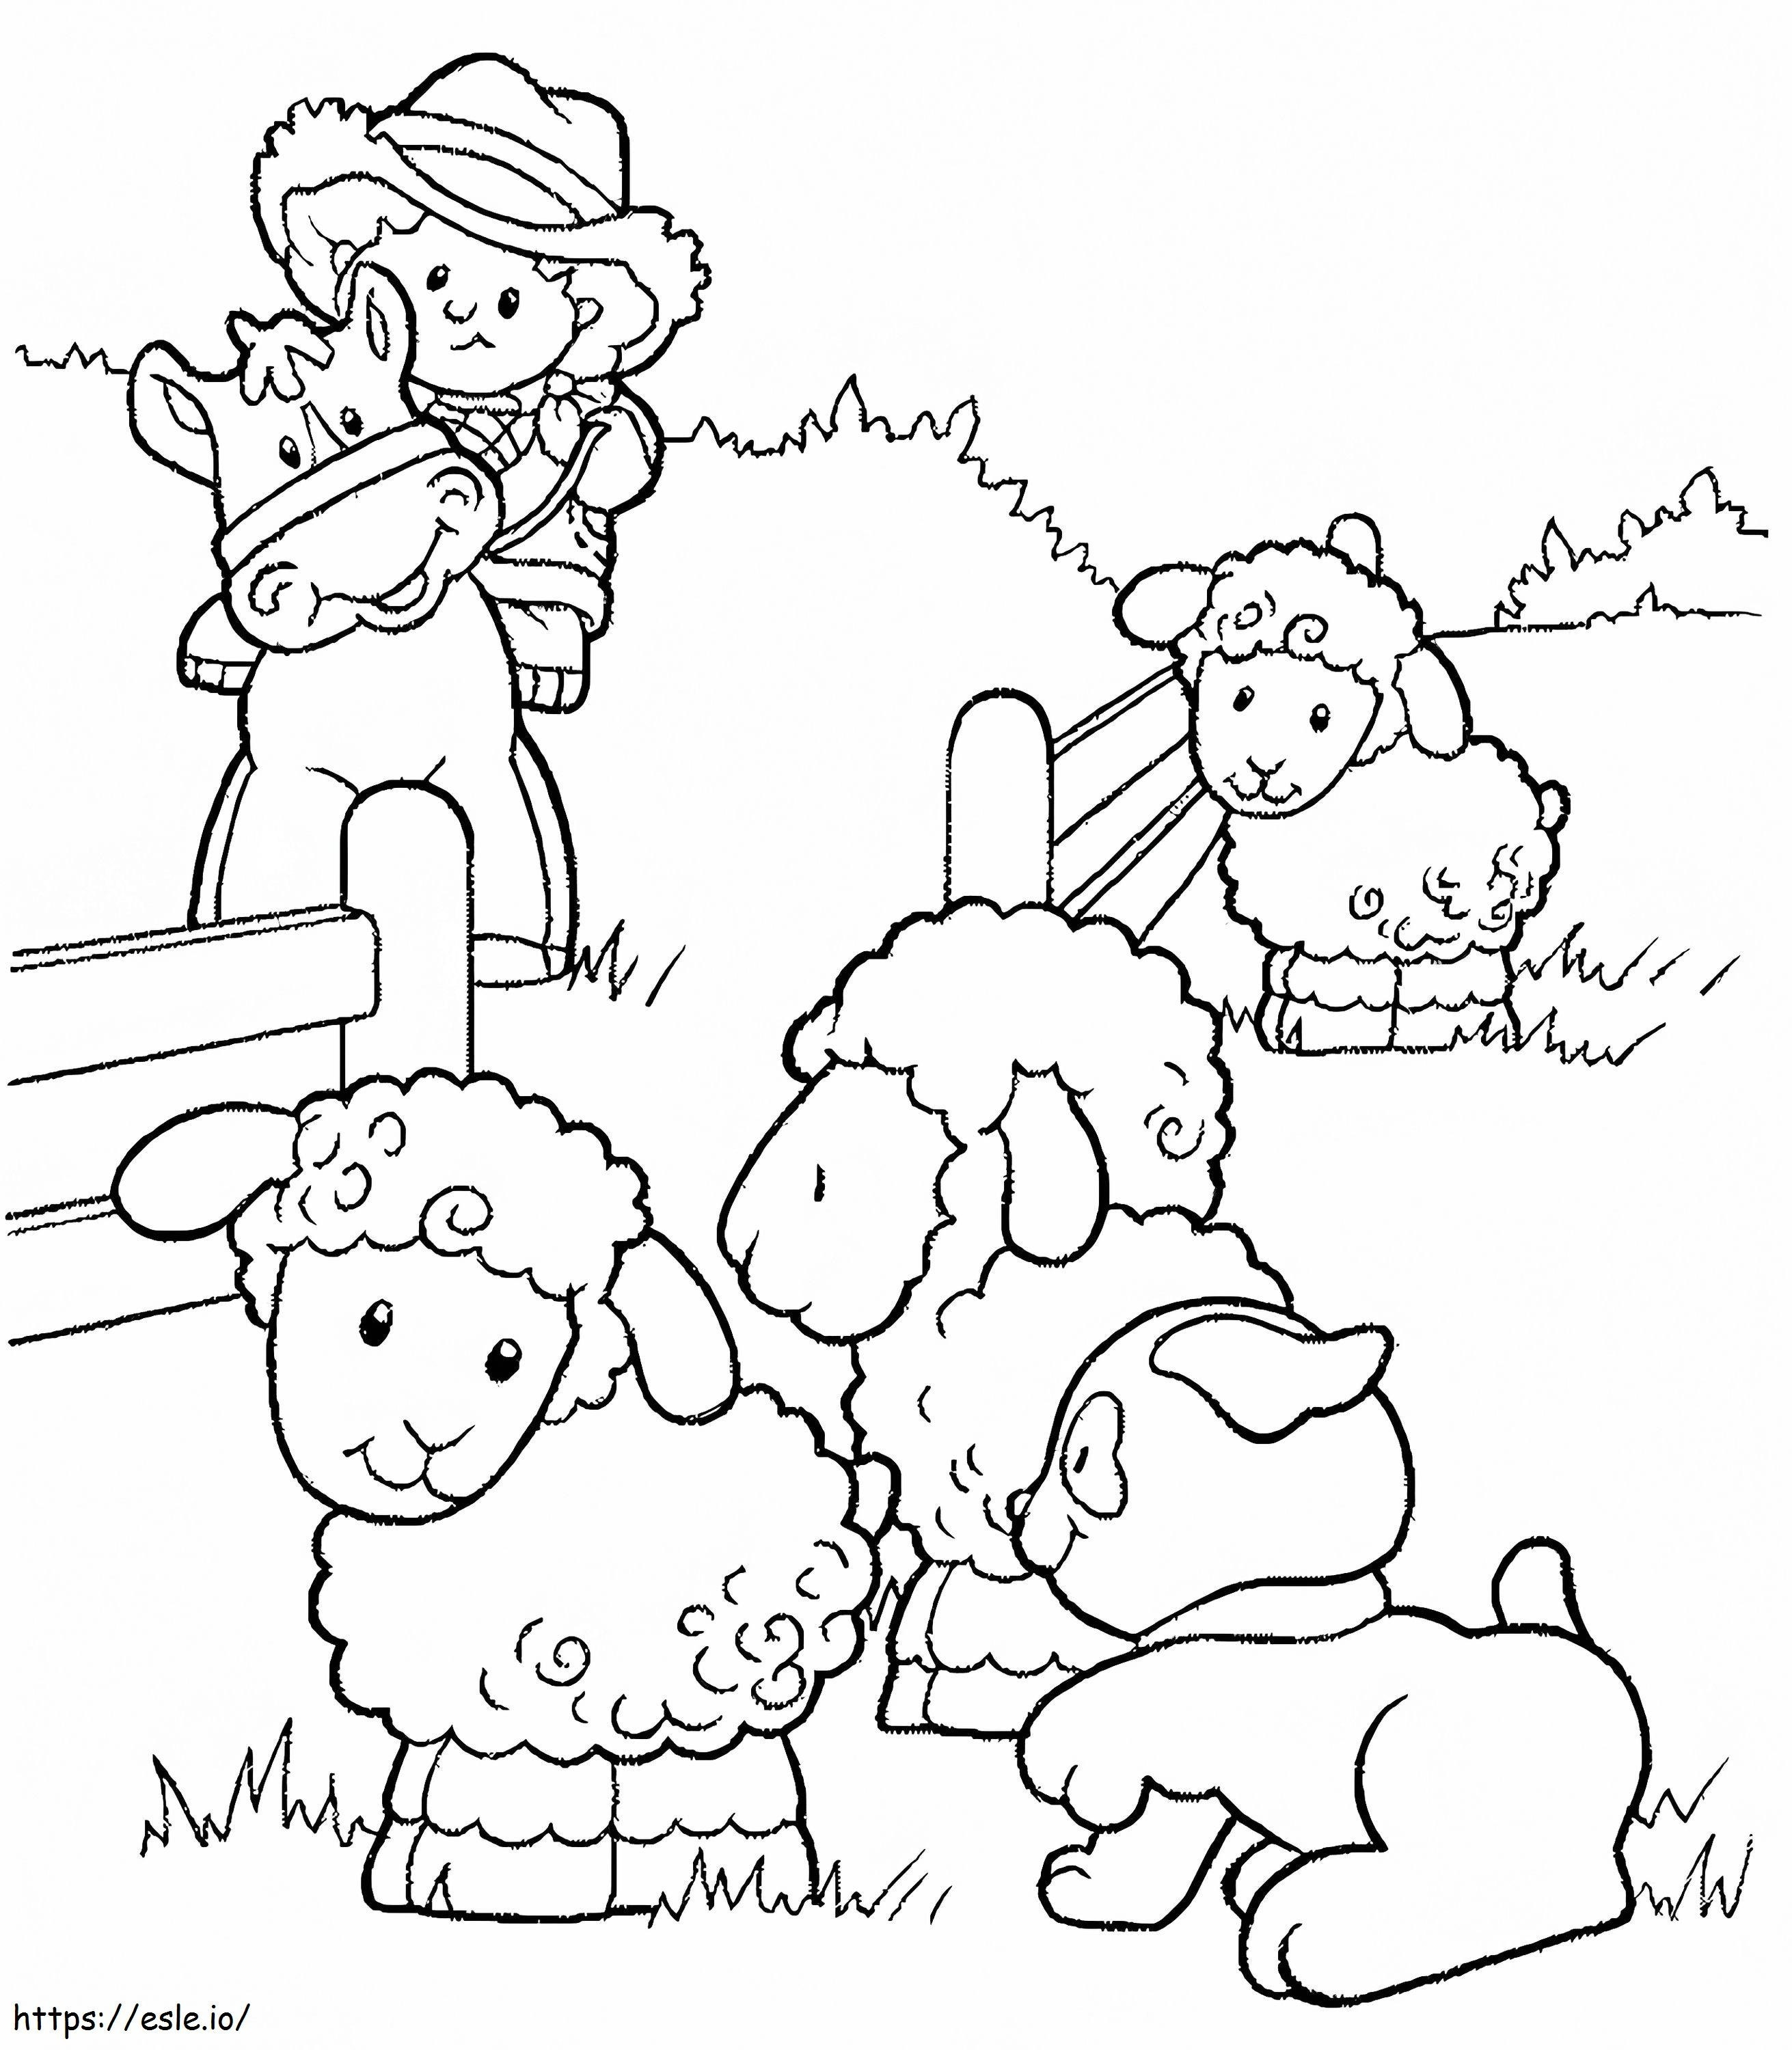 Sheep With Animals coloring page